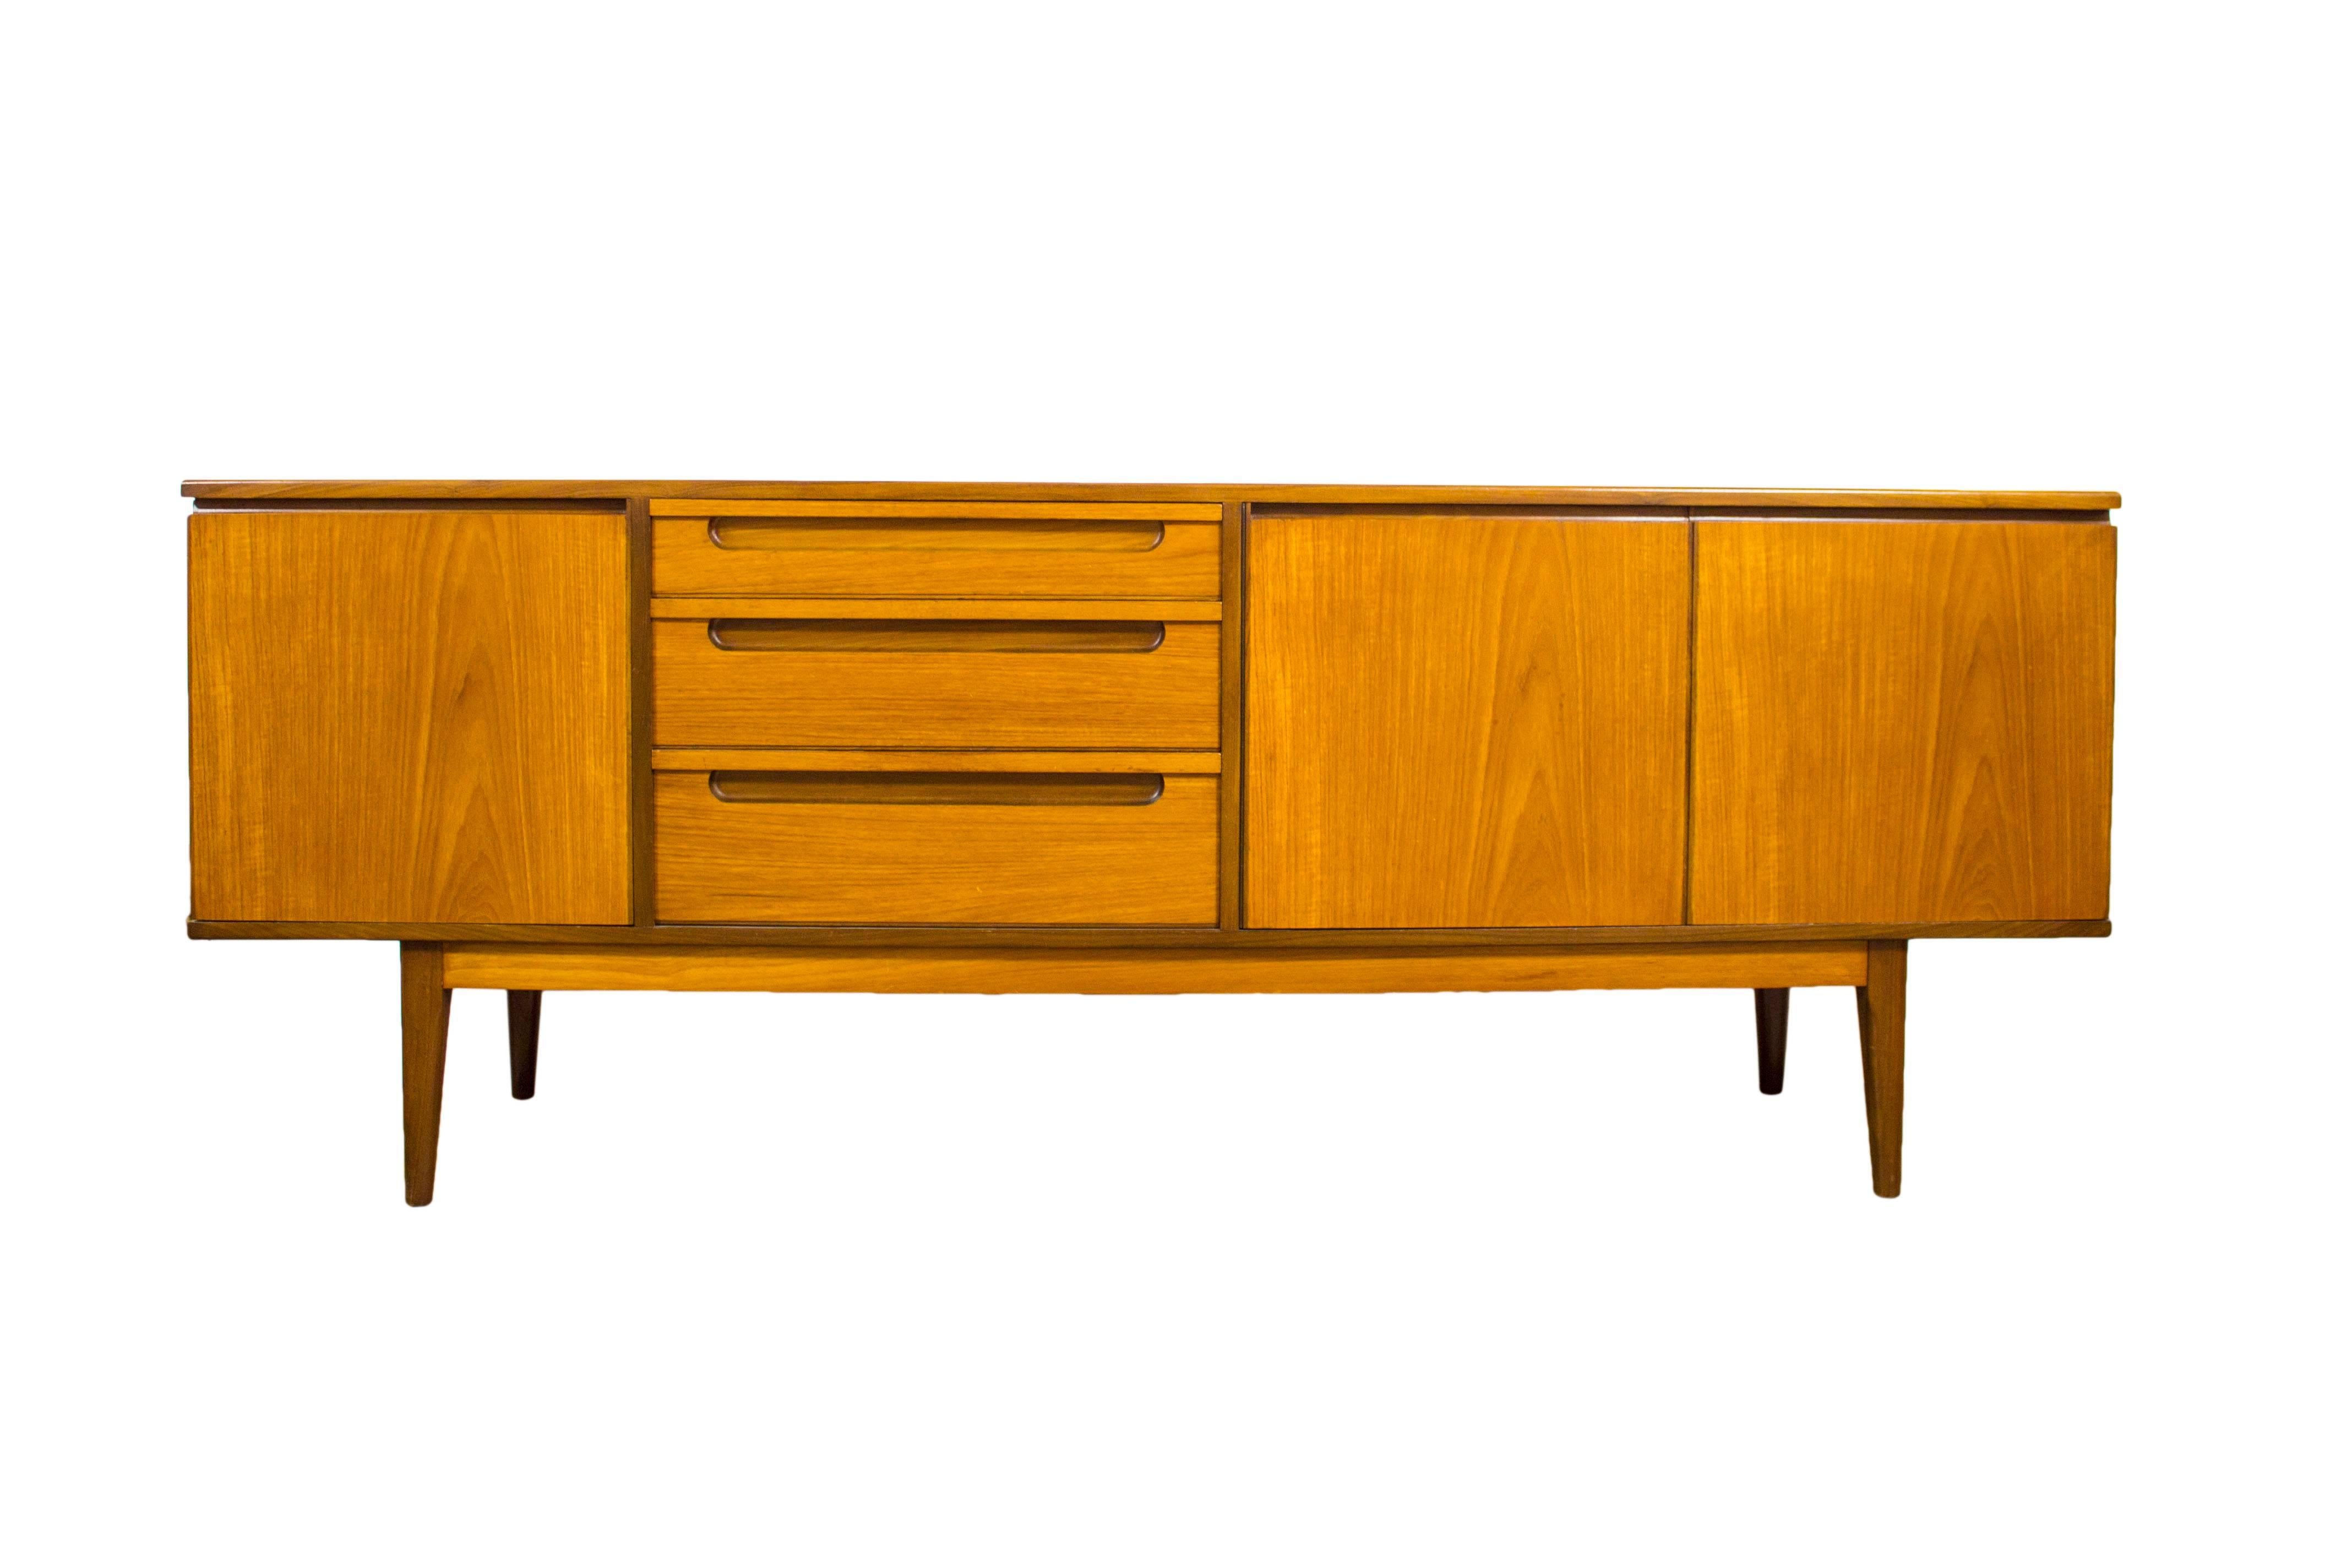 Founded in 1956, Alfred Cox (Furniture) Ltd swiftly became a household name with their high quality and stylish designs sold exclusively through Heals of London. Using the most exquisite of woods in their furniture, Alfred Cox established themselves